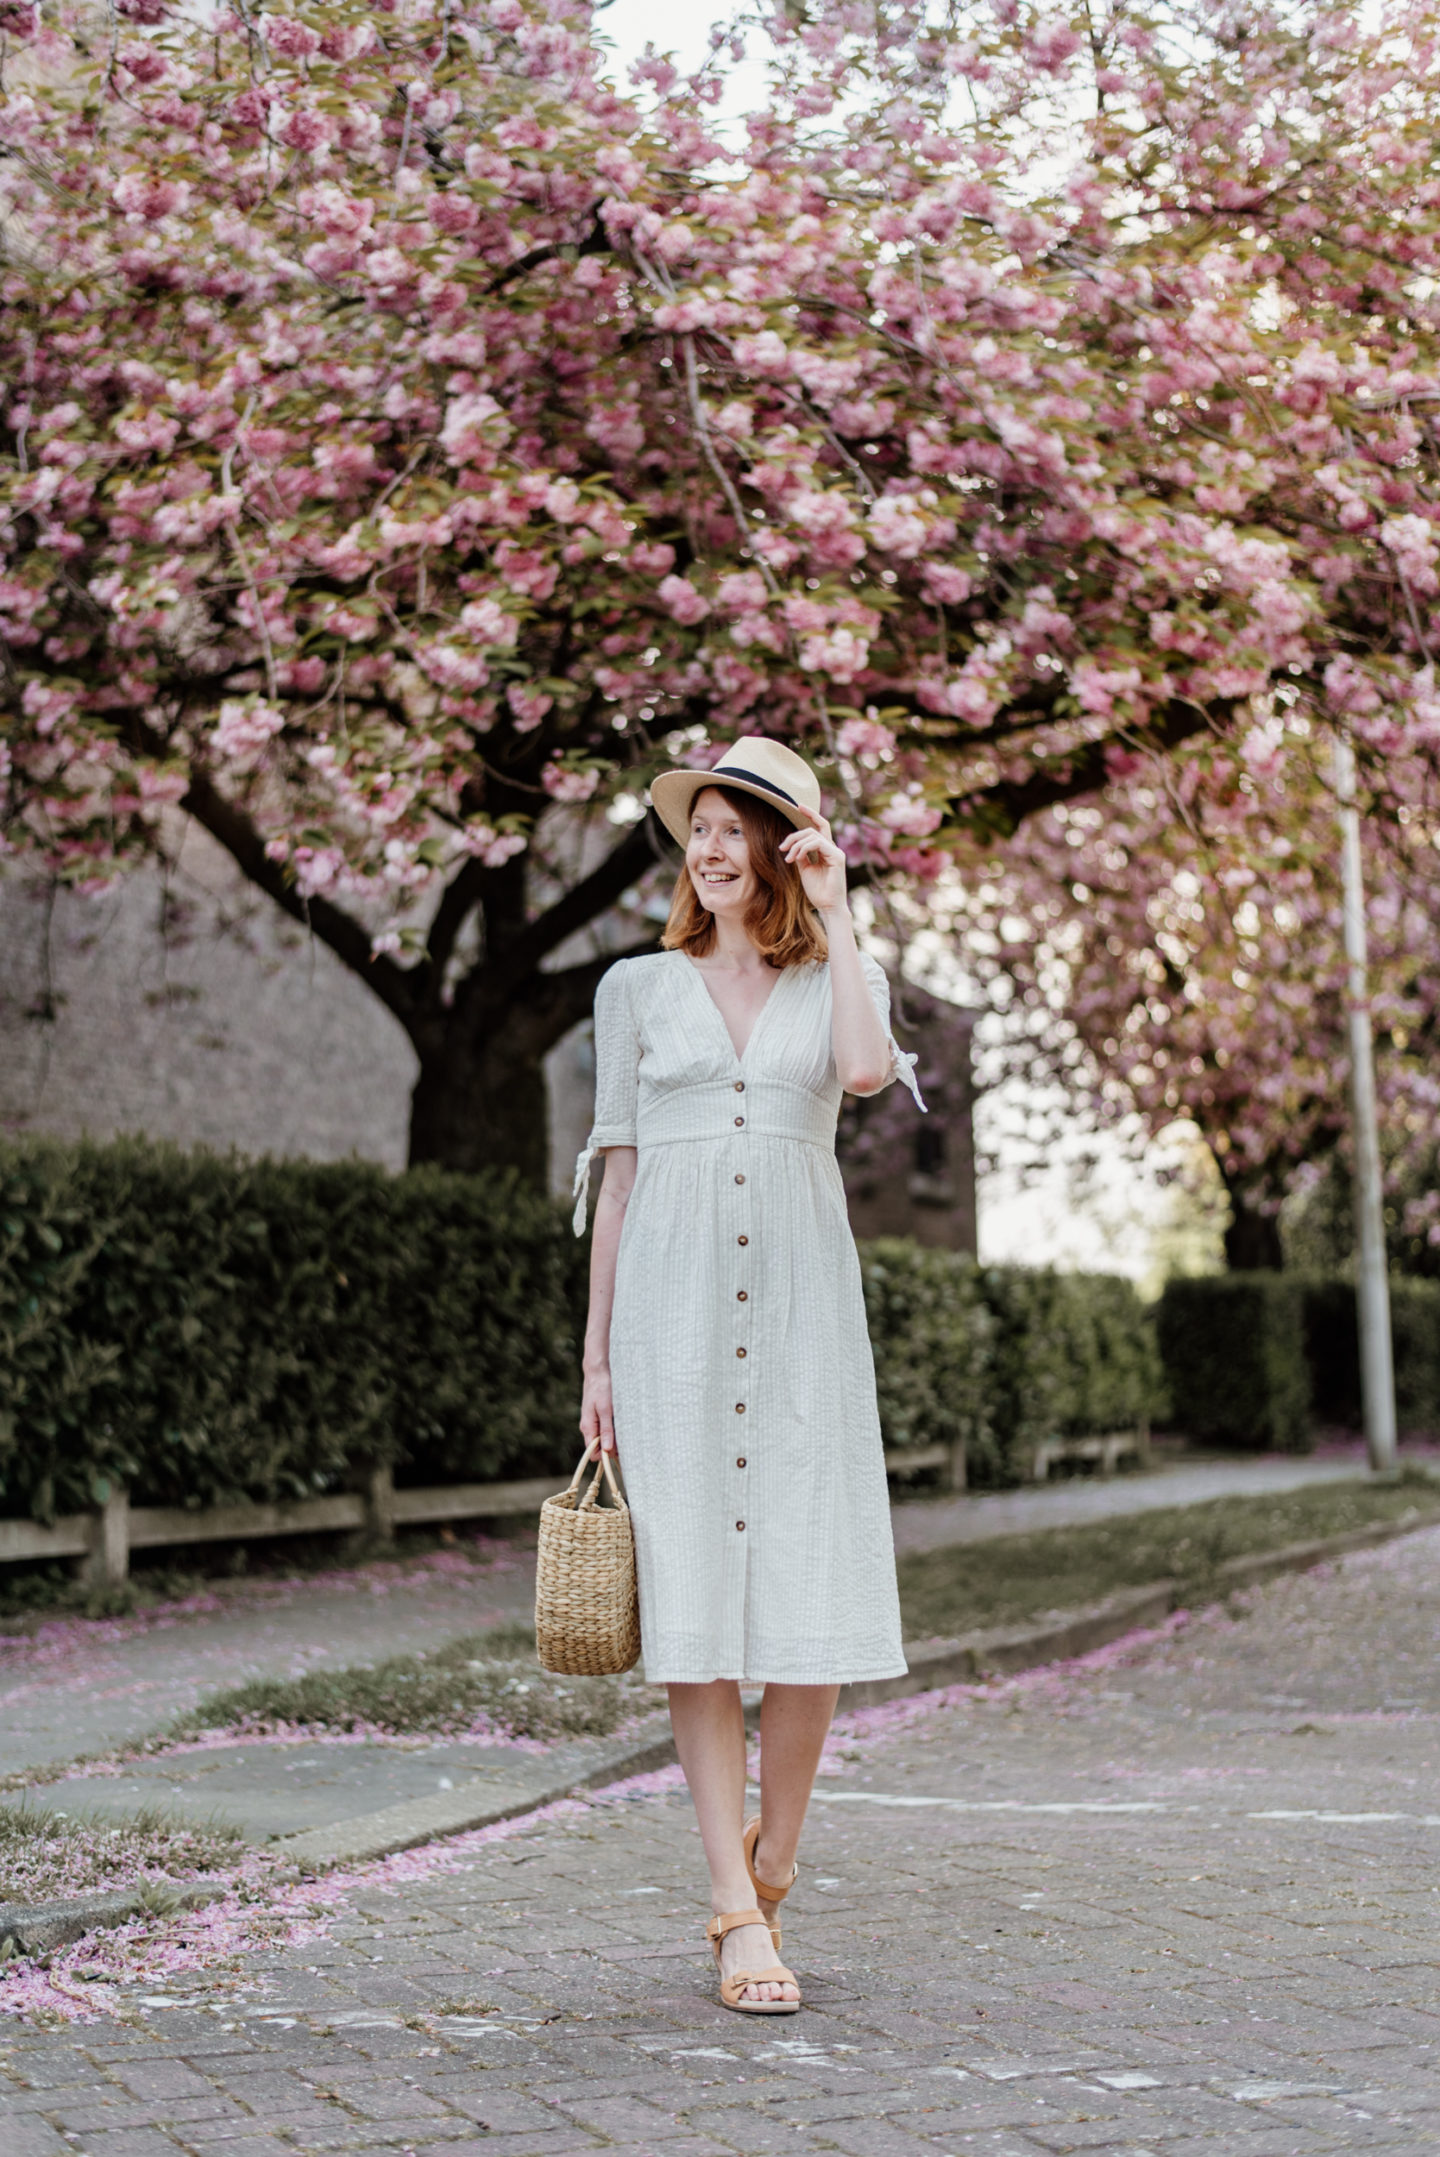 Girl in white dress and with a straw bag posing in front of cherry blossoms